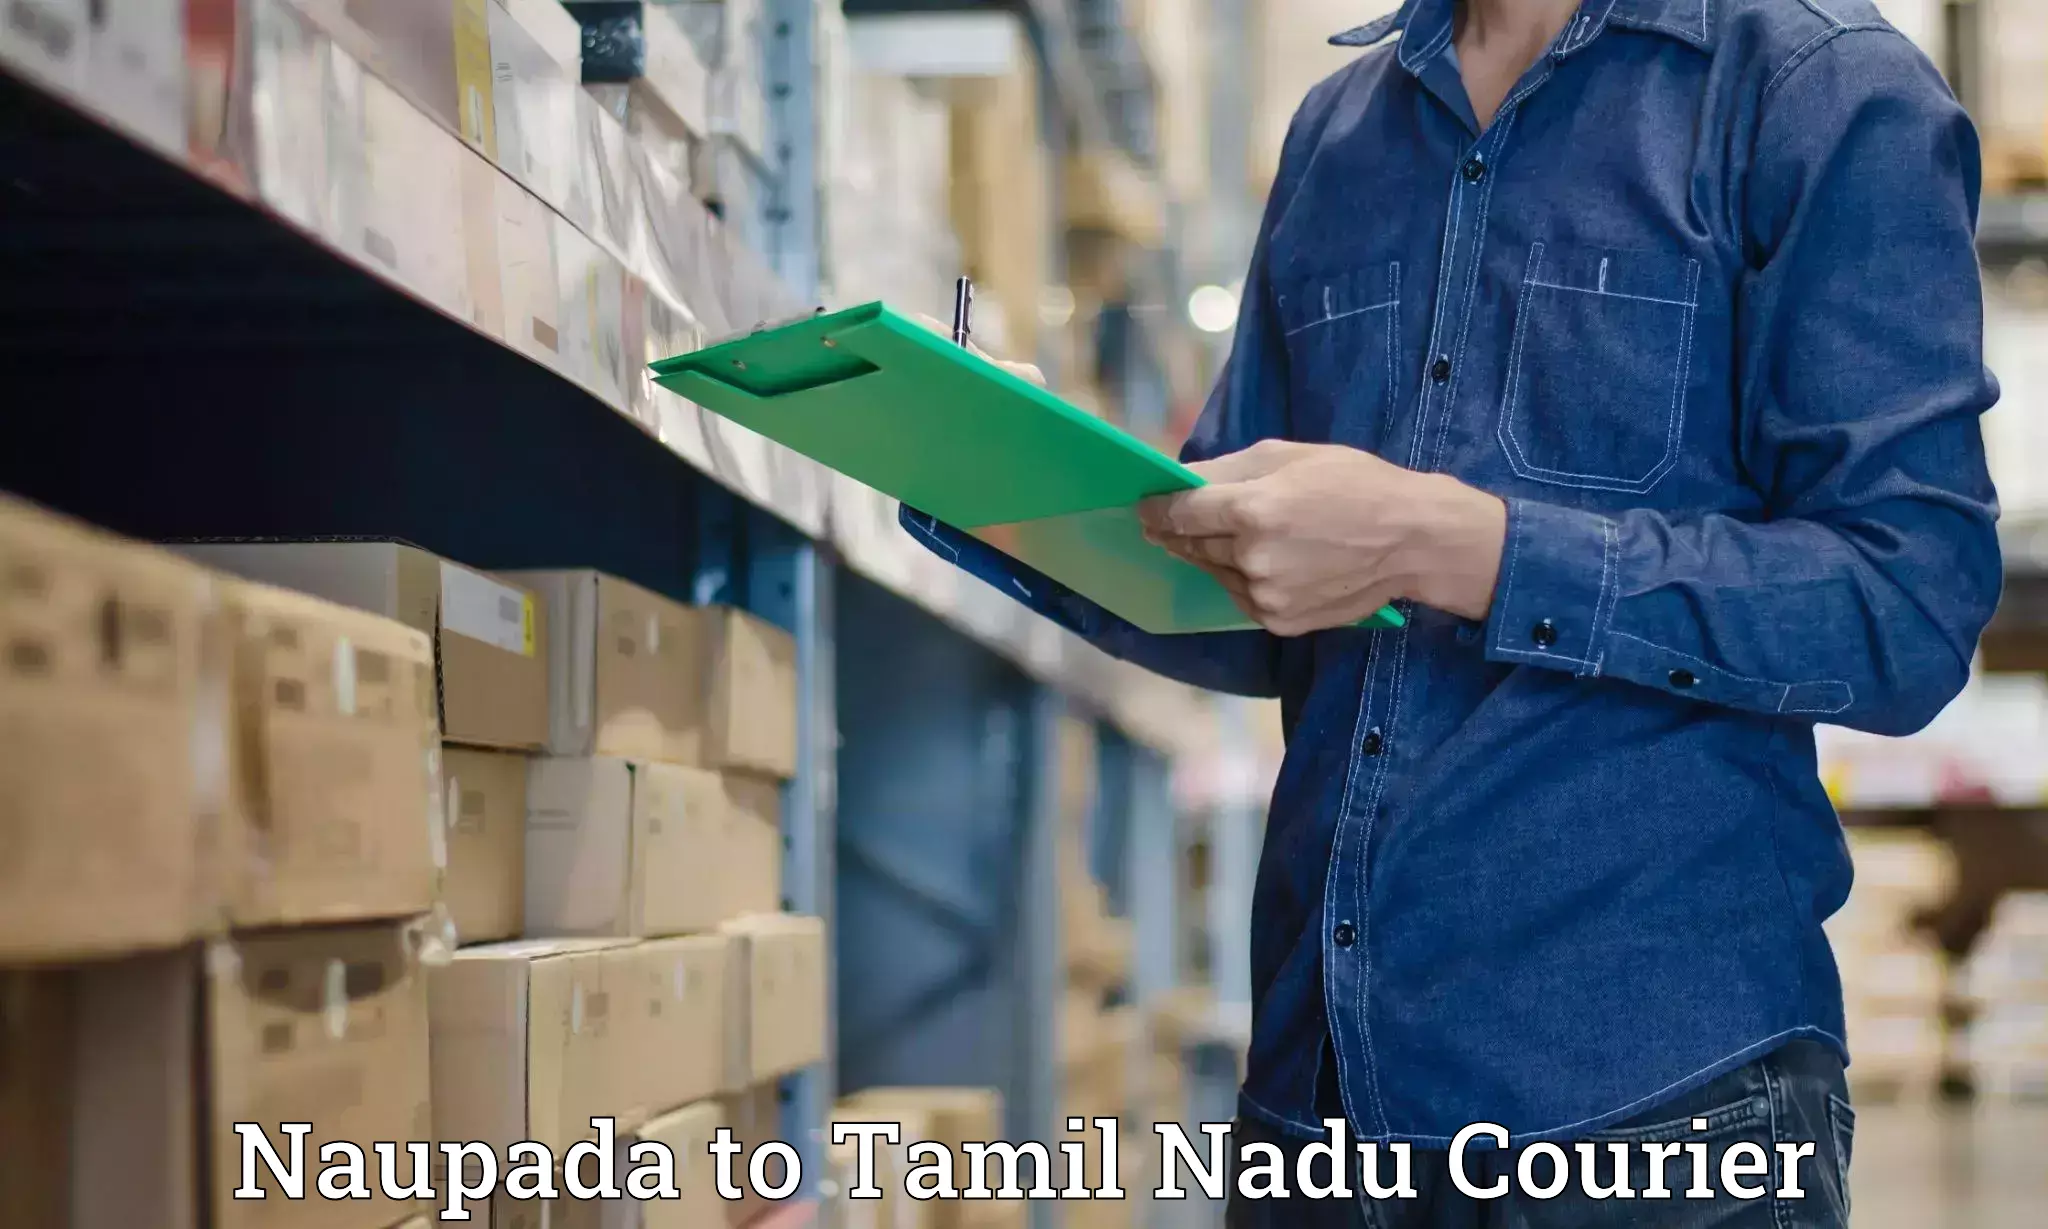 Large package courier Naupada to Chennai Port